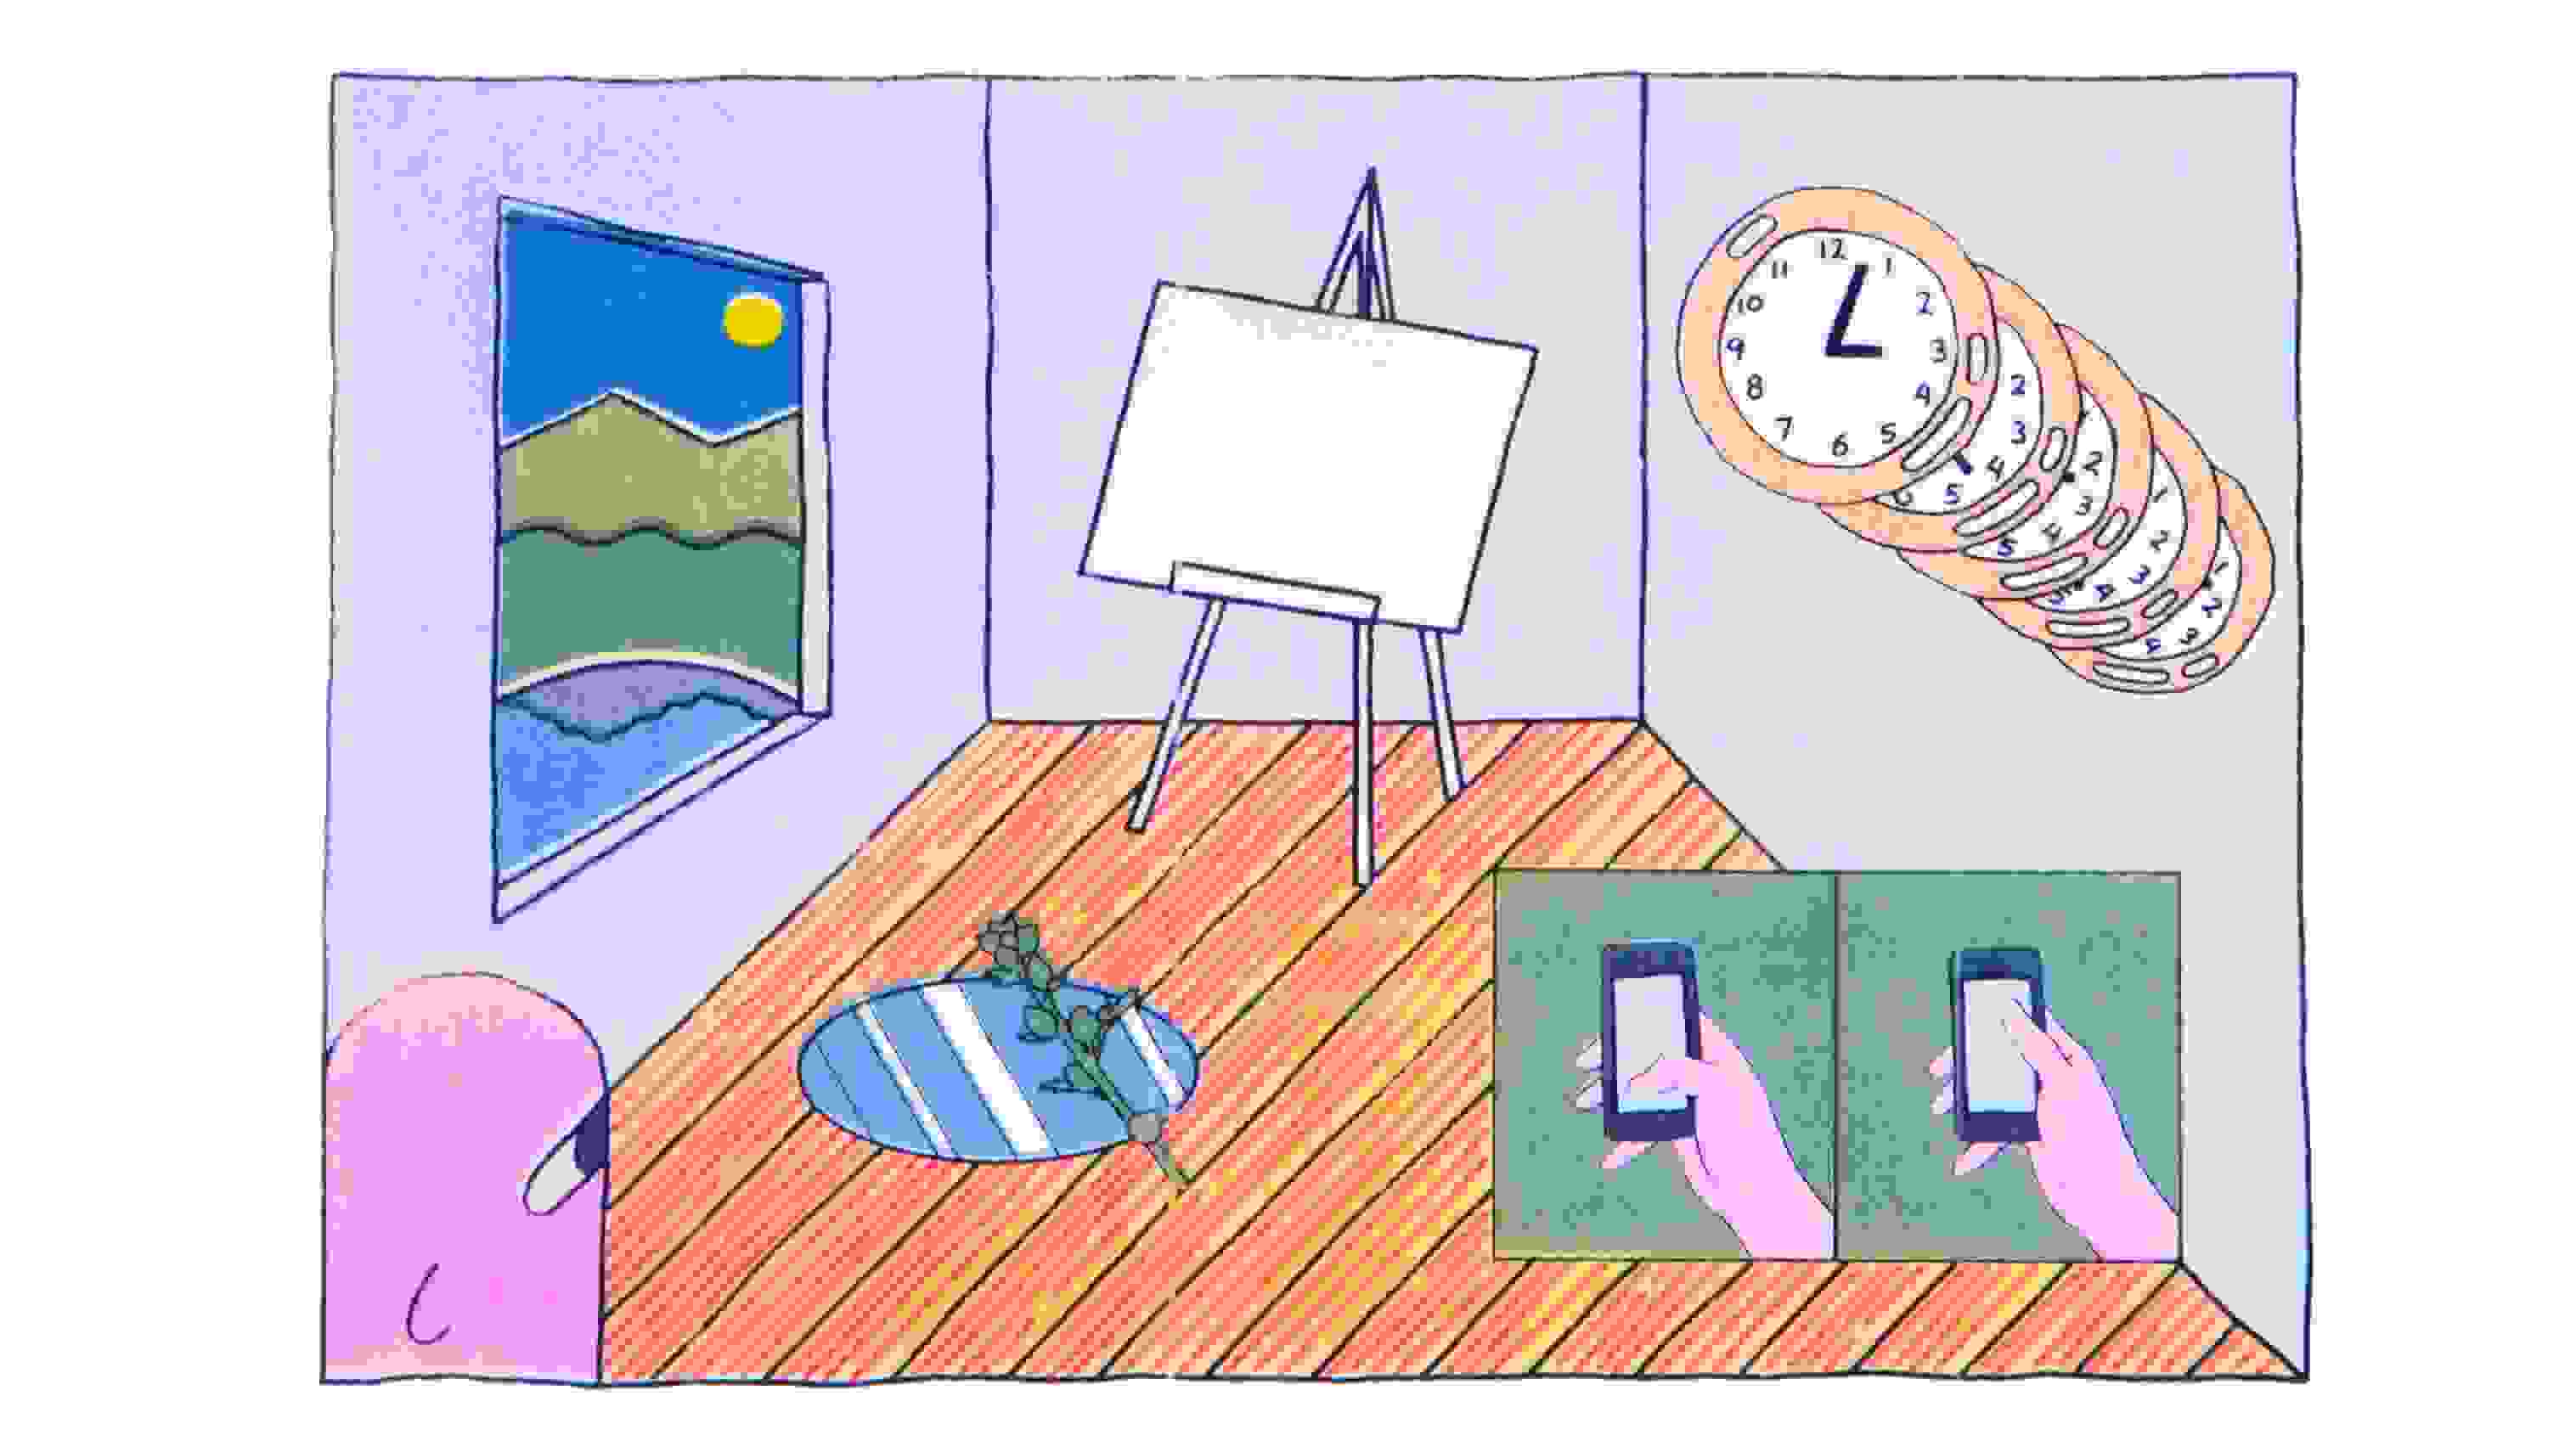 Risograph print of a drawing of an interior scene. The walls of the room are light blue, the floor is hardwood. Out the window to the left it is daylight. The face in the bottom left is content. There is a mirror on the floor with a plant over it. There is a 2-panel comic in the bottom right with a thumb scrolling on a phone. There is a series of clocks over the 2-panel comic. in the center of the room is a blank canvas. 